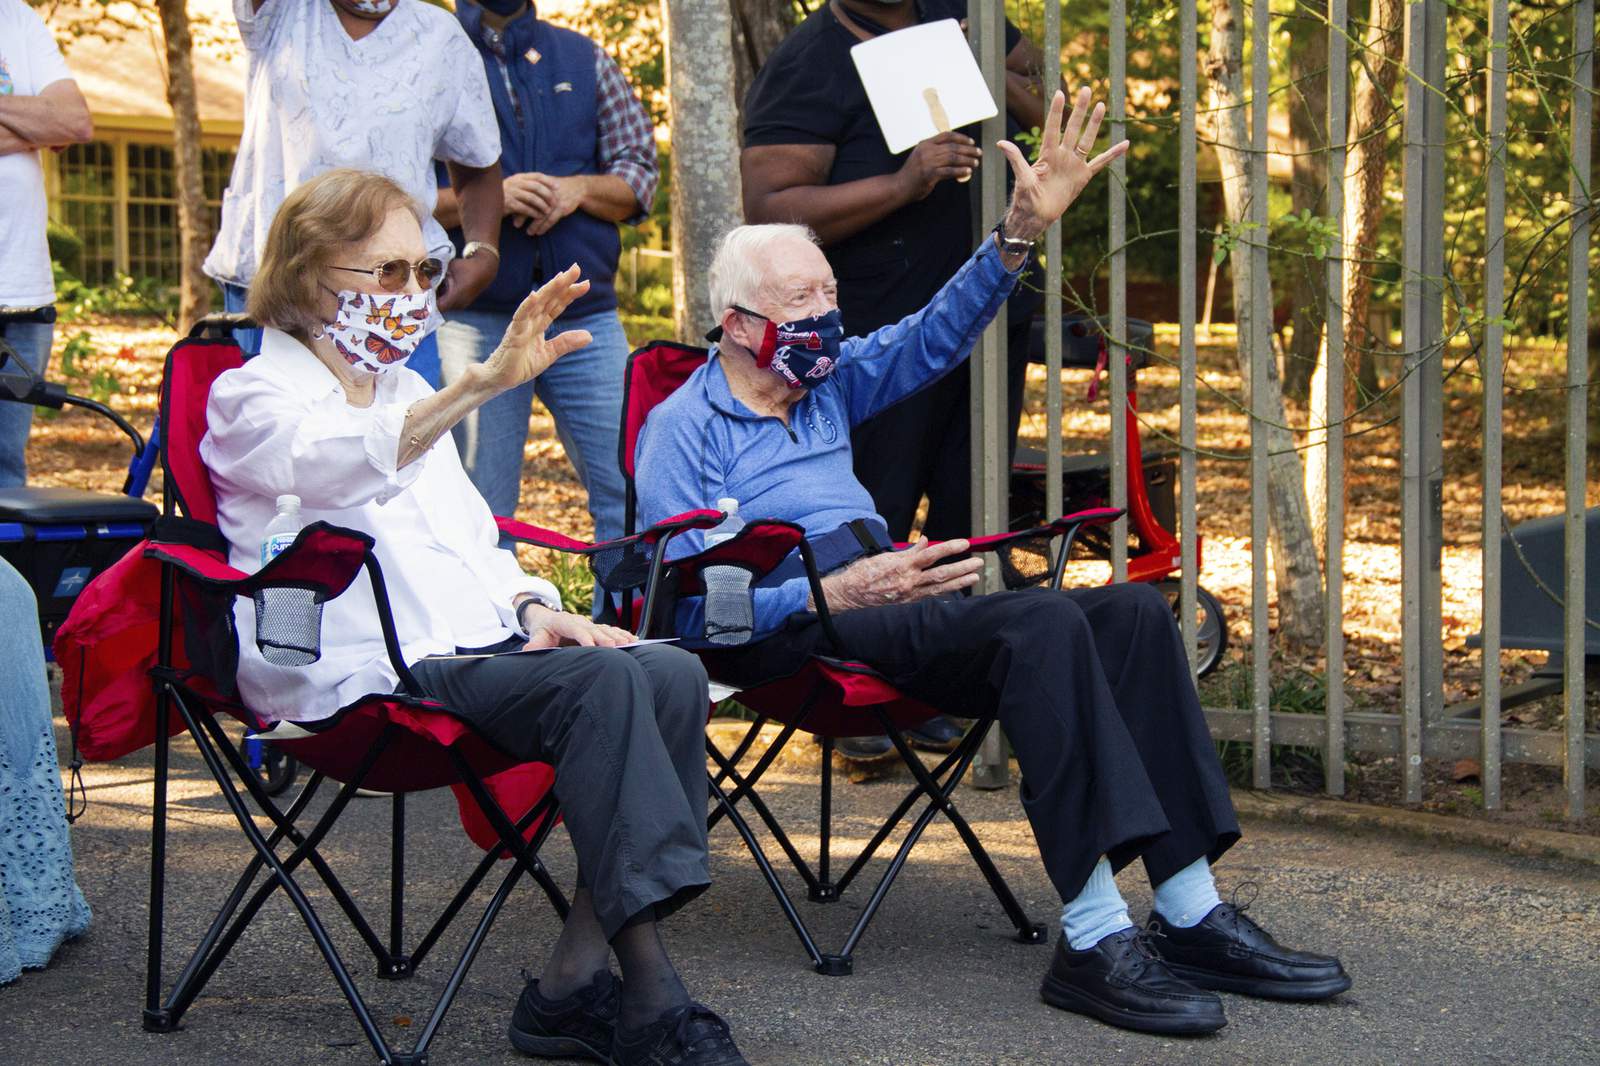 A mask and parade: Jimmy Carter celebrates 96th birthday